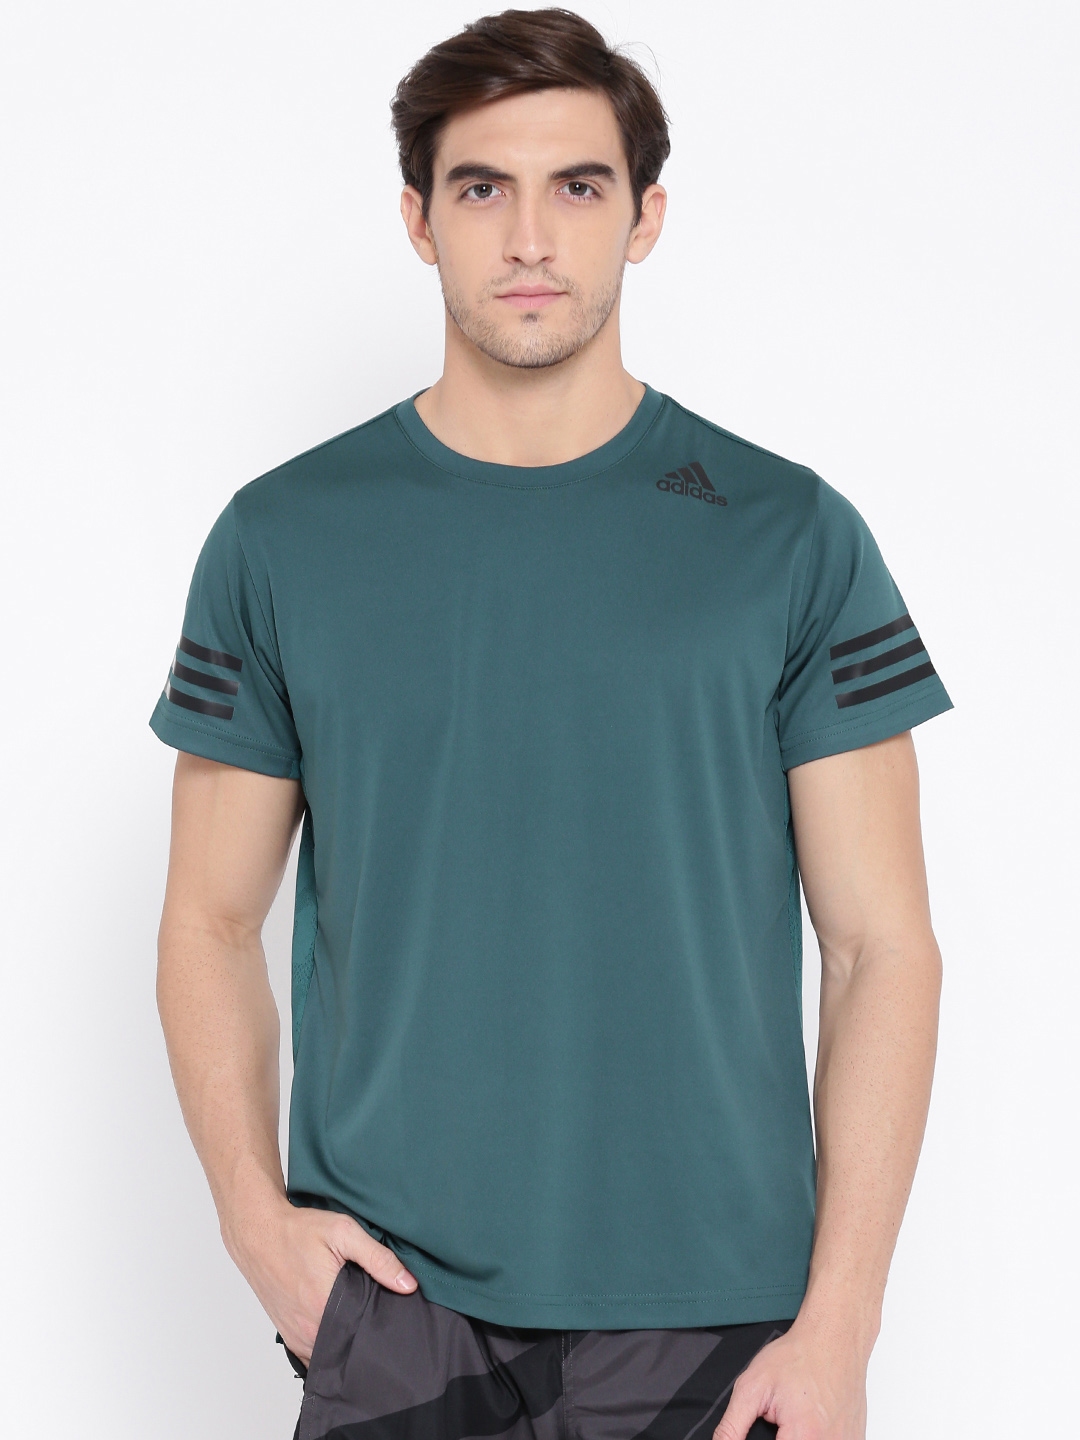 Buy ADIDAS Men Teal Green Climacool Solid Round Neck T Shirt - Tshirts ...